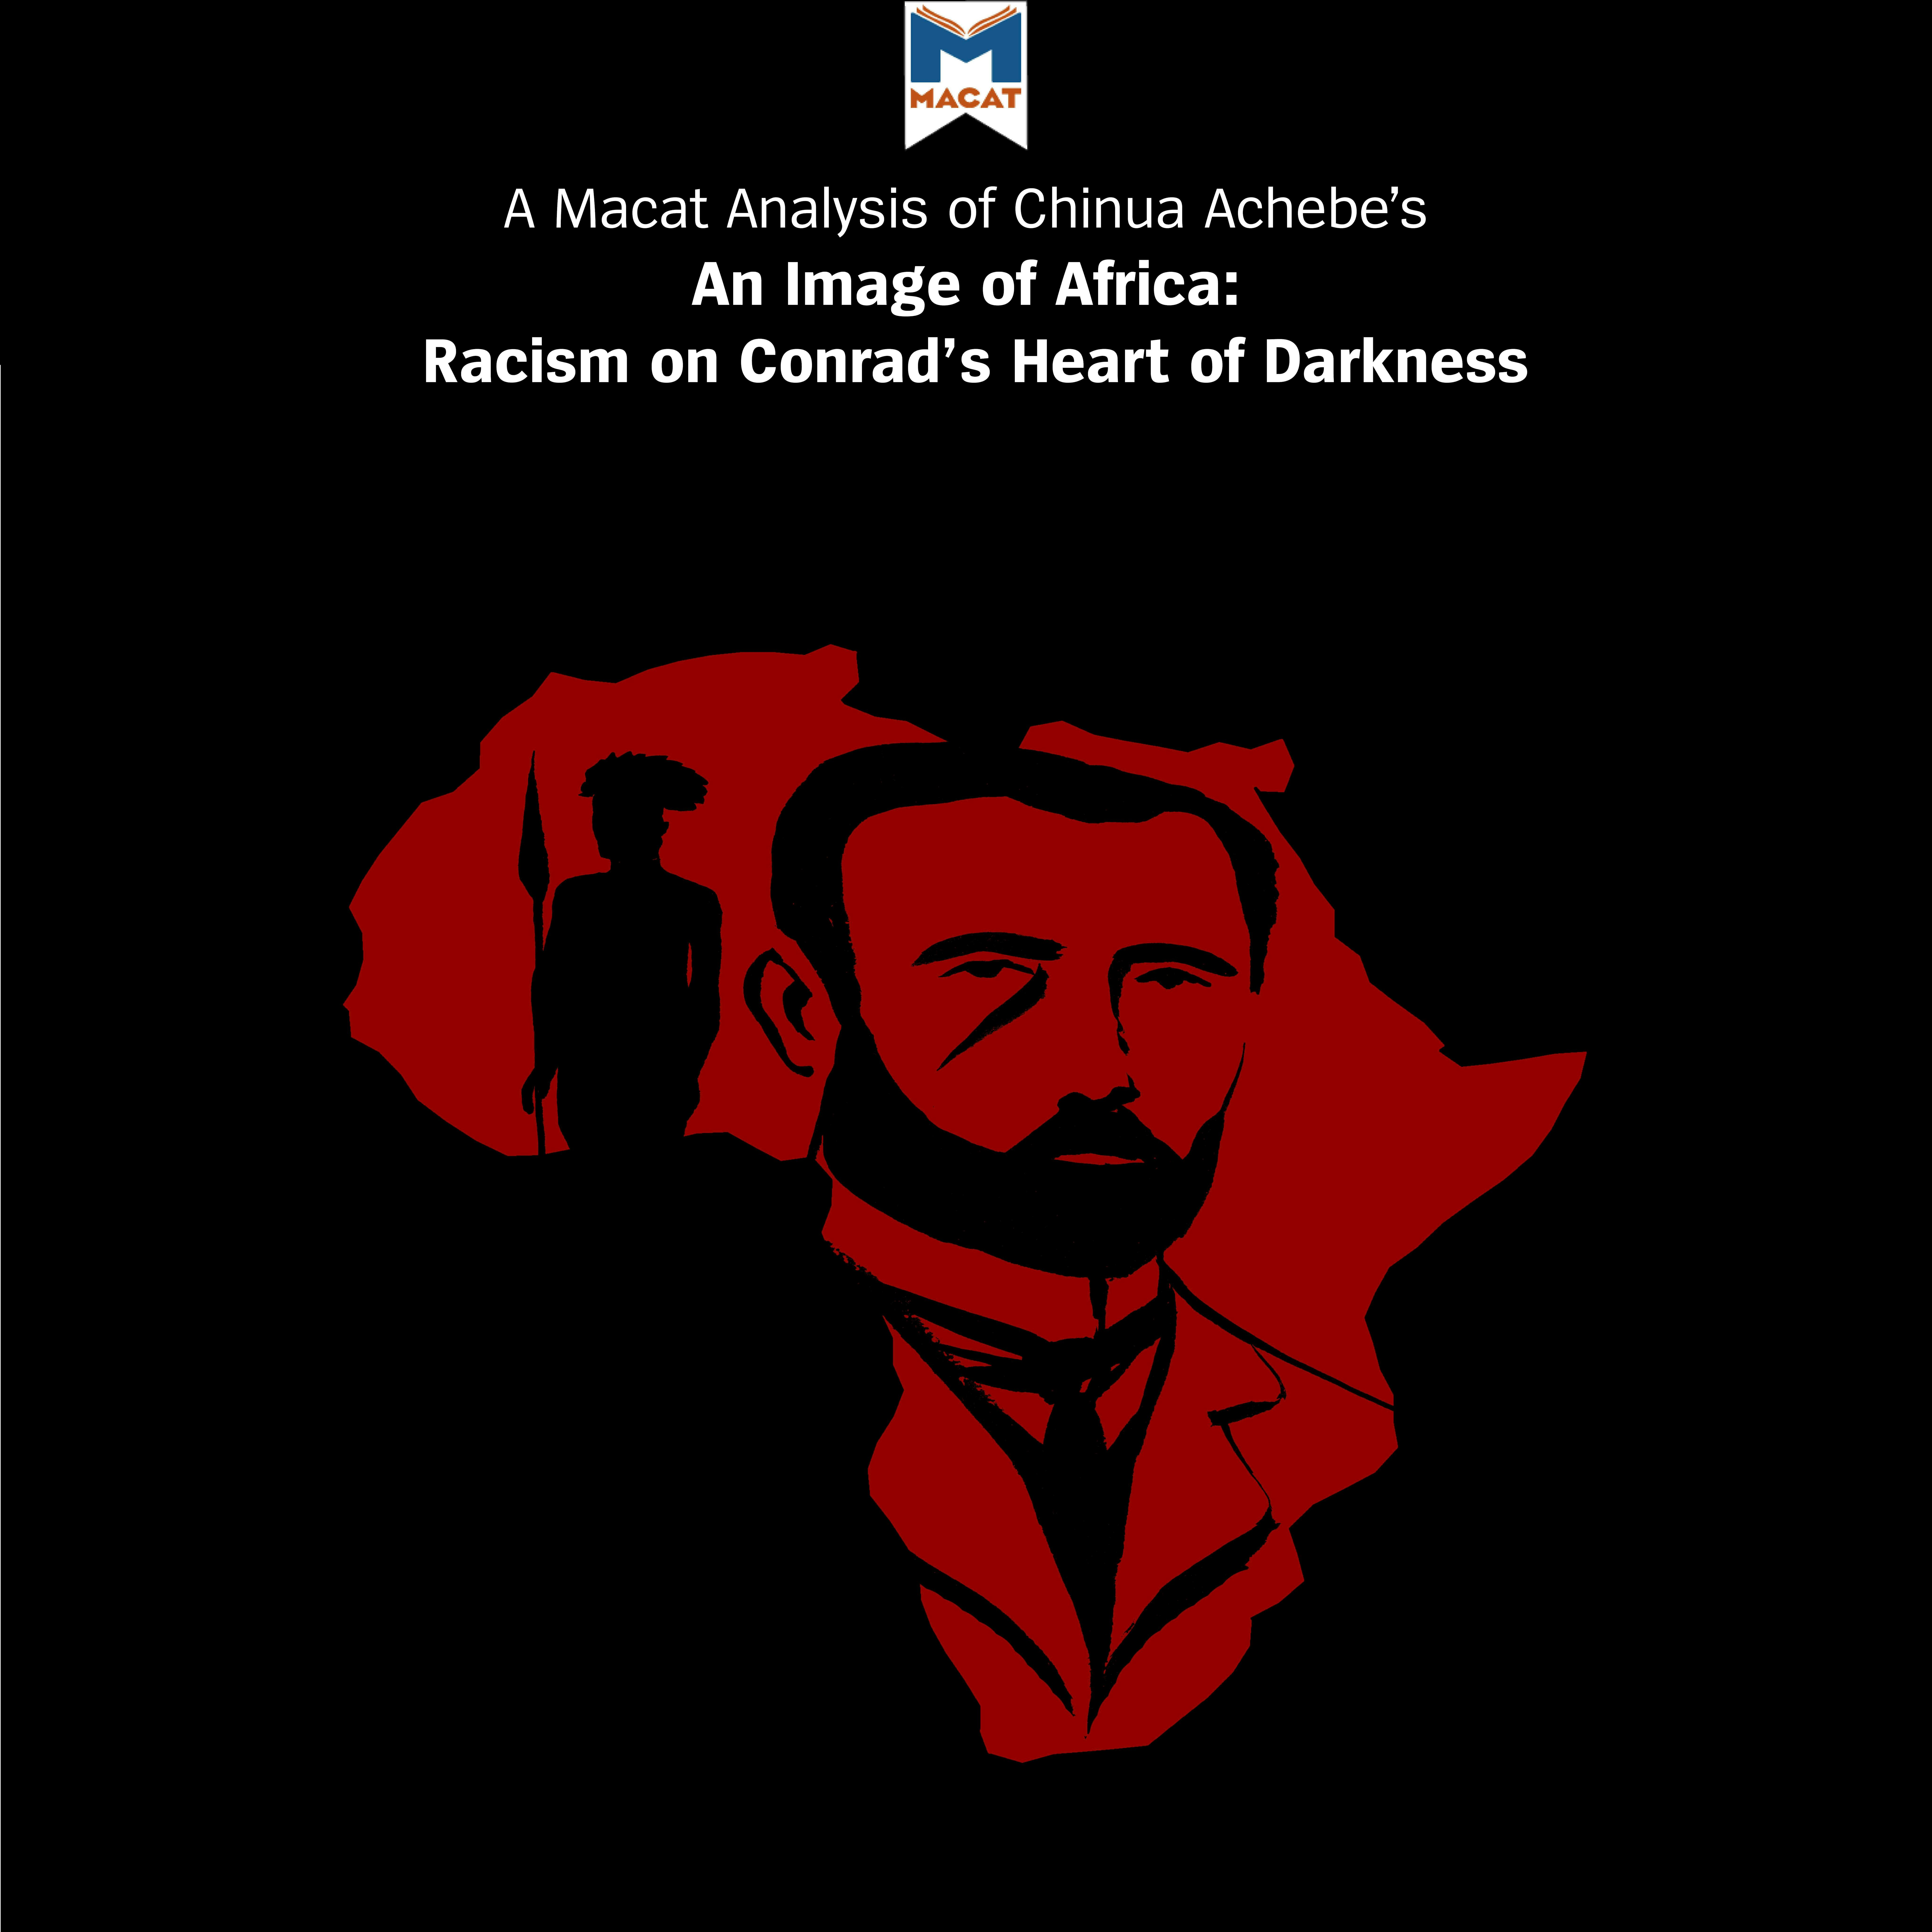 A Macat Analysis of Chinua Achebe's An Image of Africa: Racism in Conrad's "Heart of Darkness" - undefined